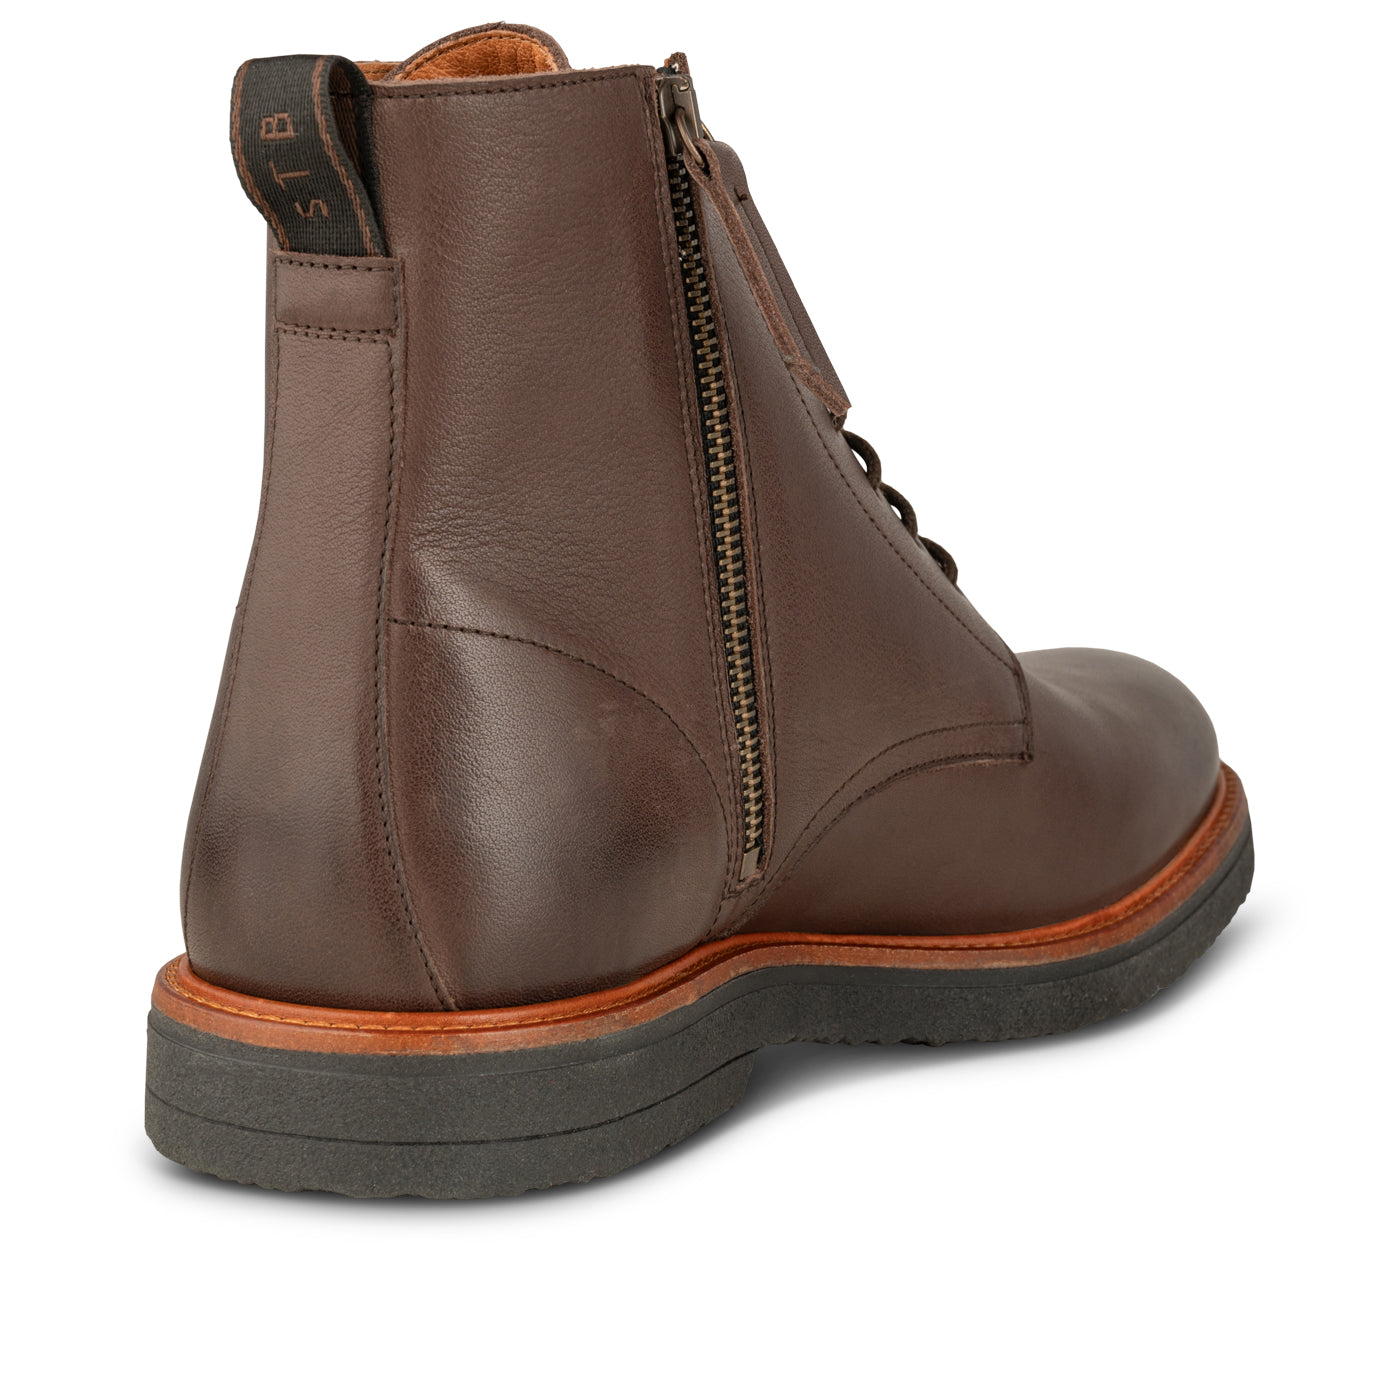 SHOE THE BEAR MENS STB-Kip Laced Water Repellent Boots 067 Brown